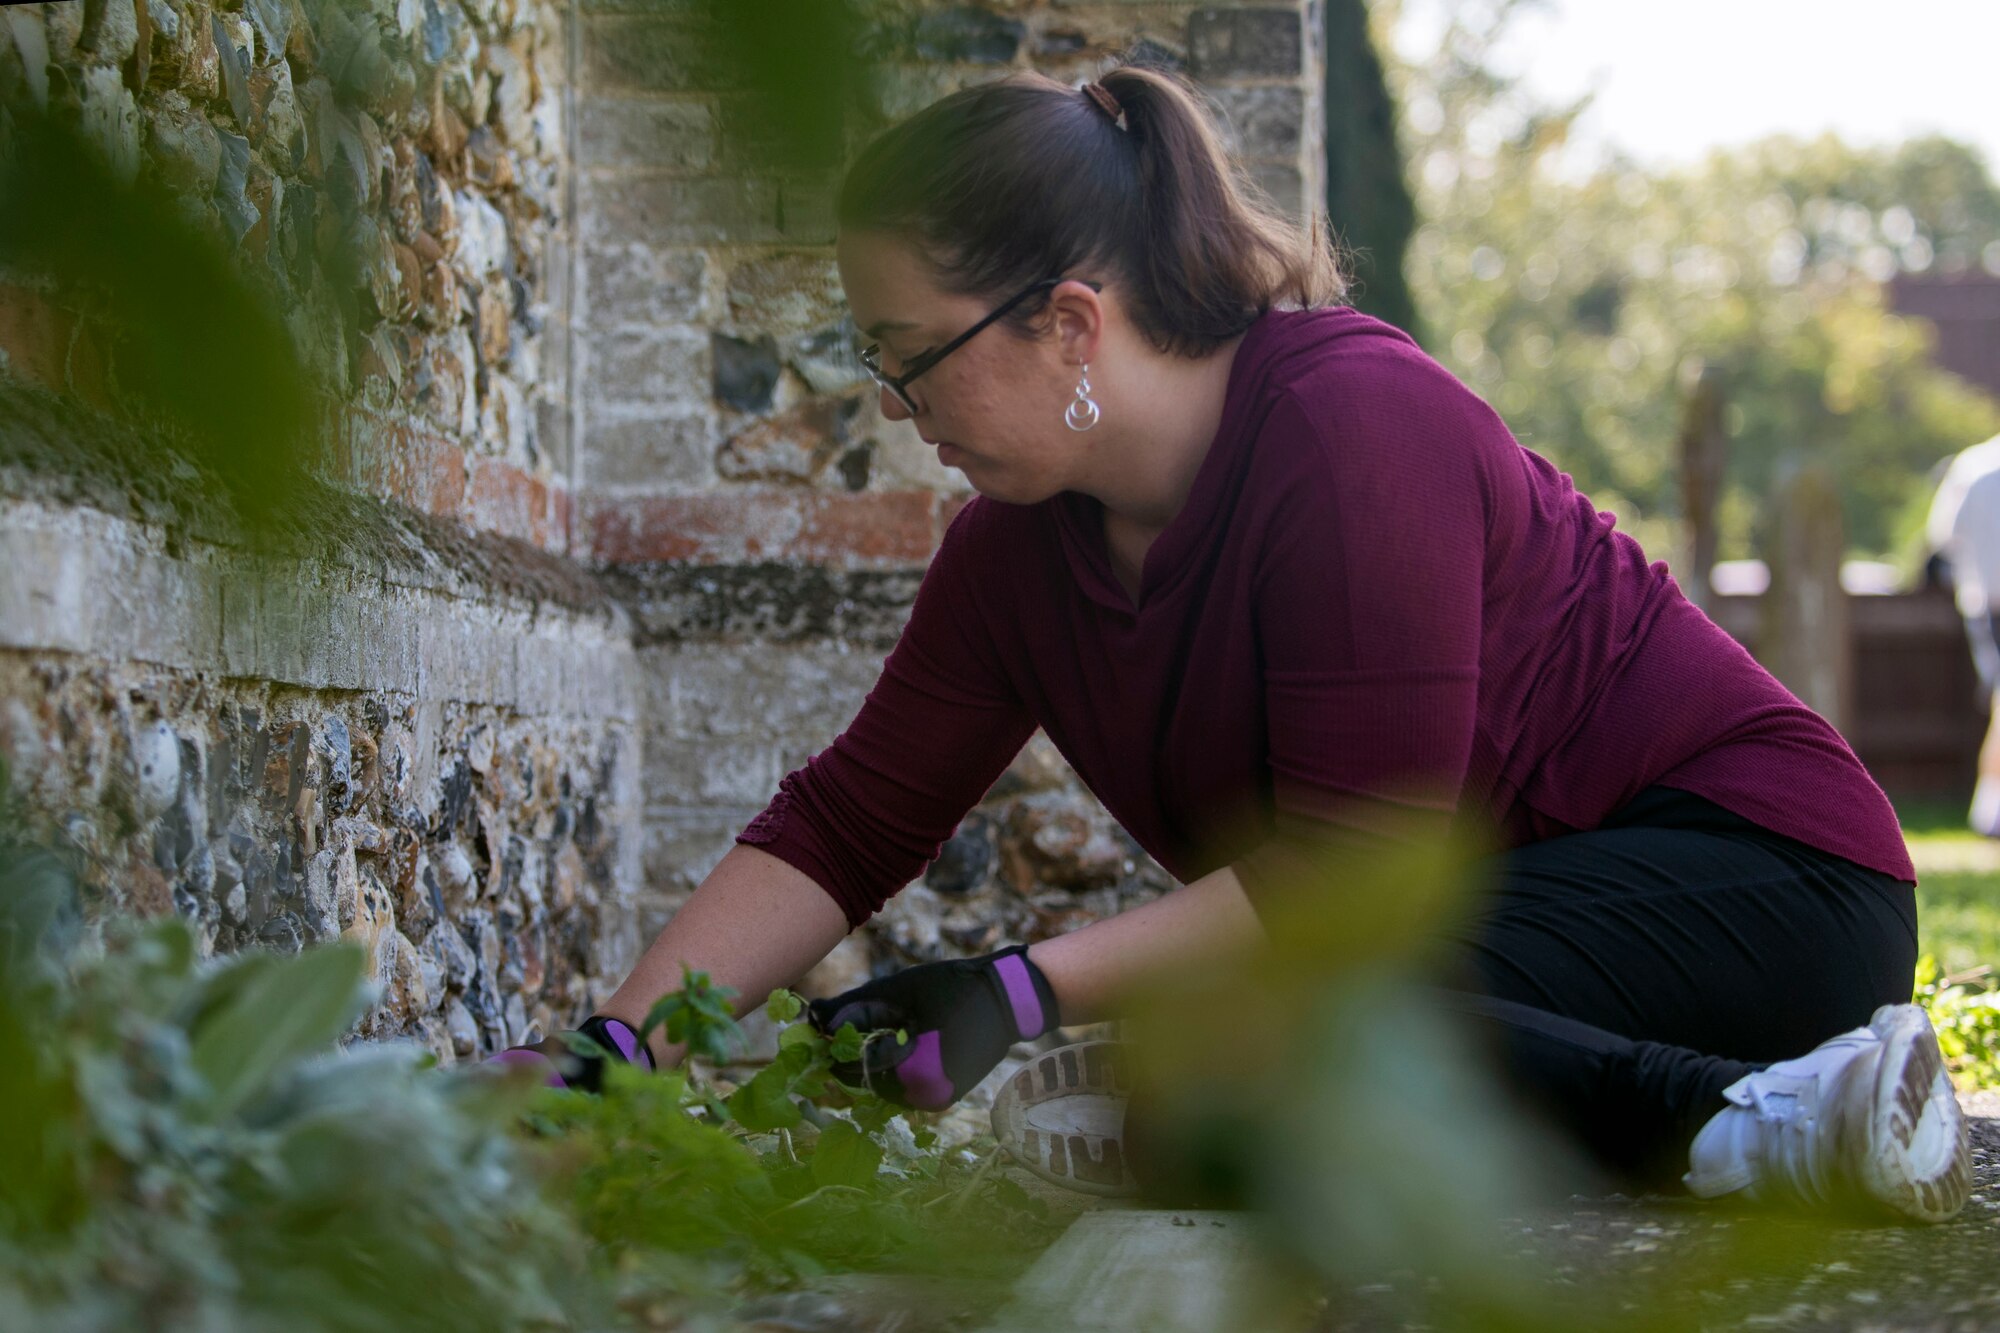 U.S. Air Force Tech. Sgt. Holly Lodin, weeds along St. John’s Church during a volunteer event in Beck Row, England, Sept. 29, 2018. Volunteers from the 48th Fighter Wing and Team Mildenhall painted, pulled weeds and cleaned the grounds of the church. (U.S. Air Force photo by Staff Sgt. Christine Groening)